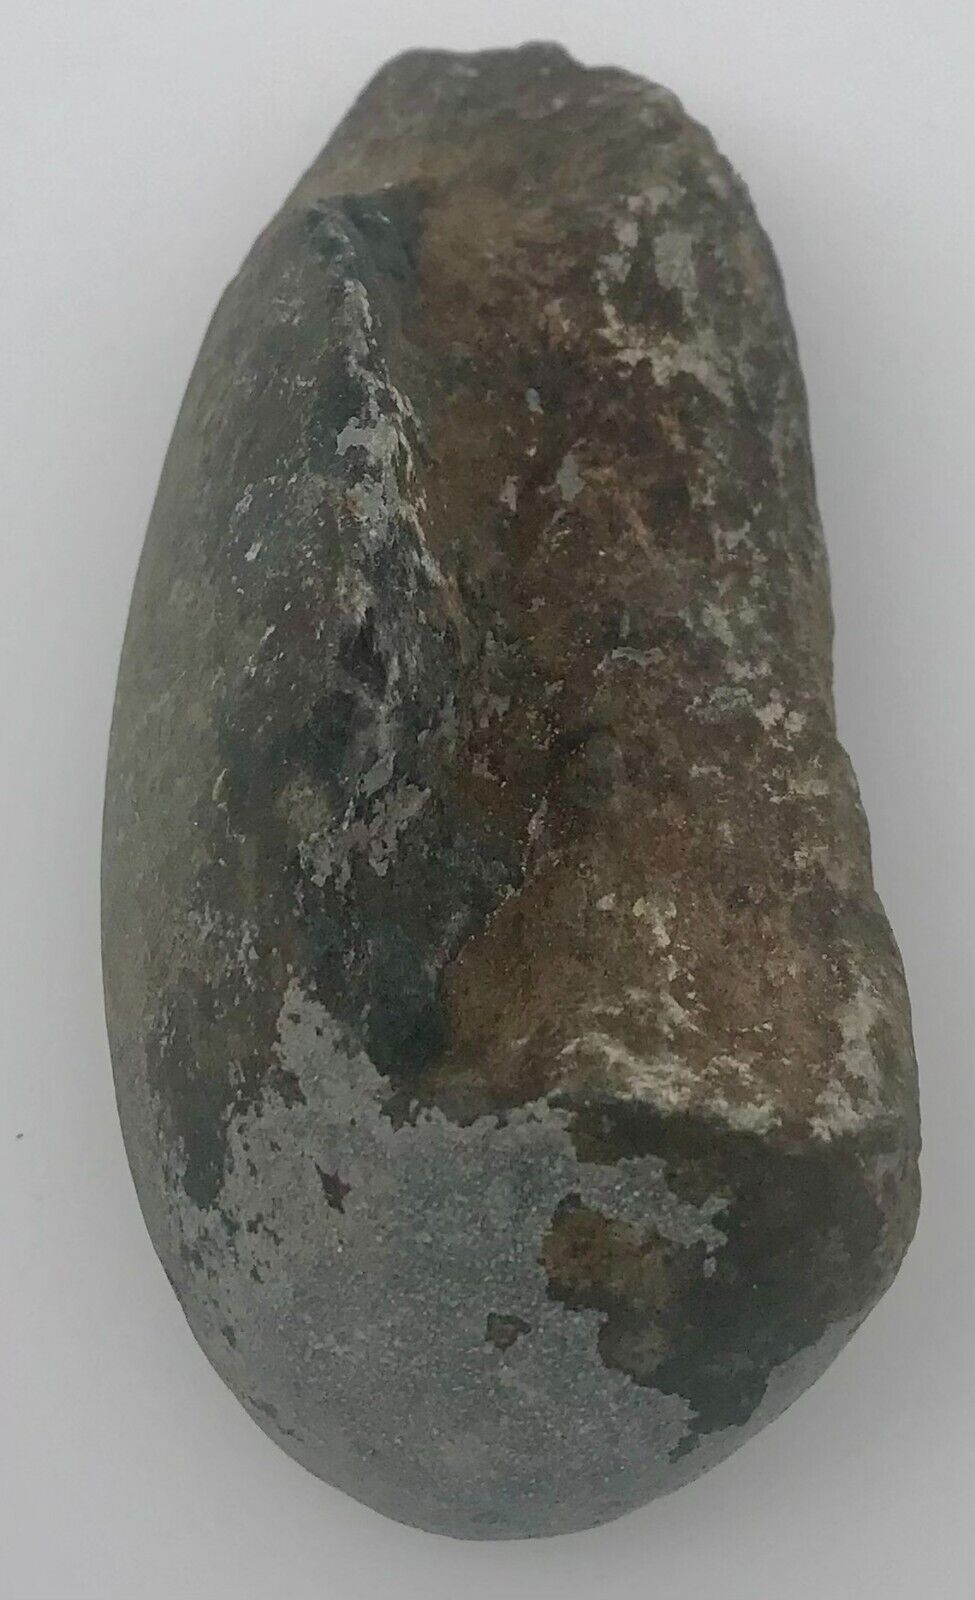 Unidentified Prehistoric Possible Reptile Fossil Fossilized Egg